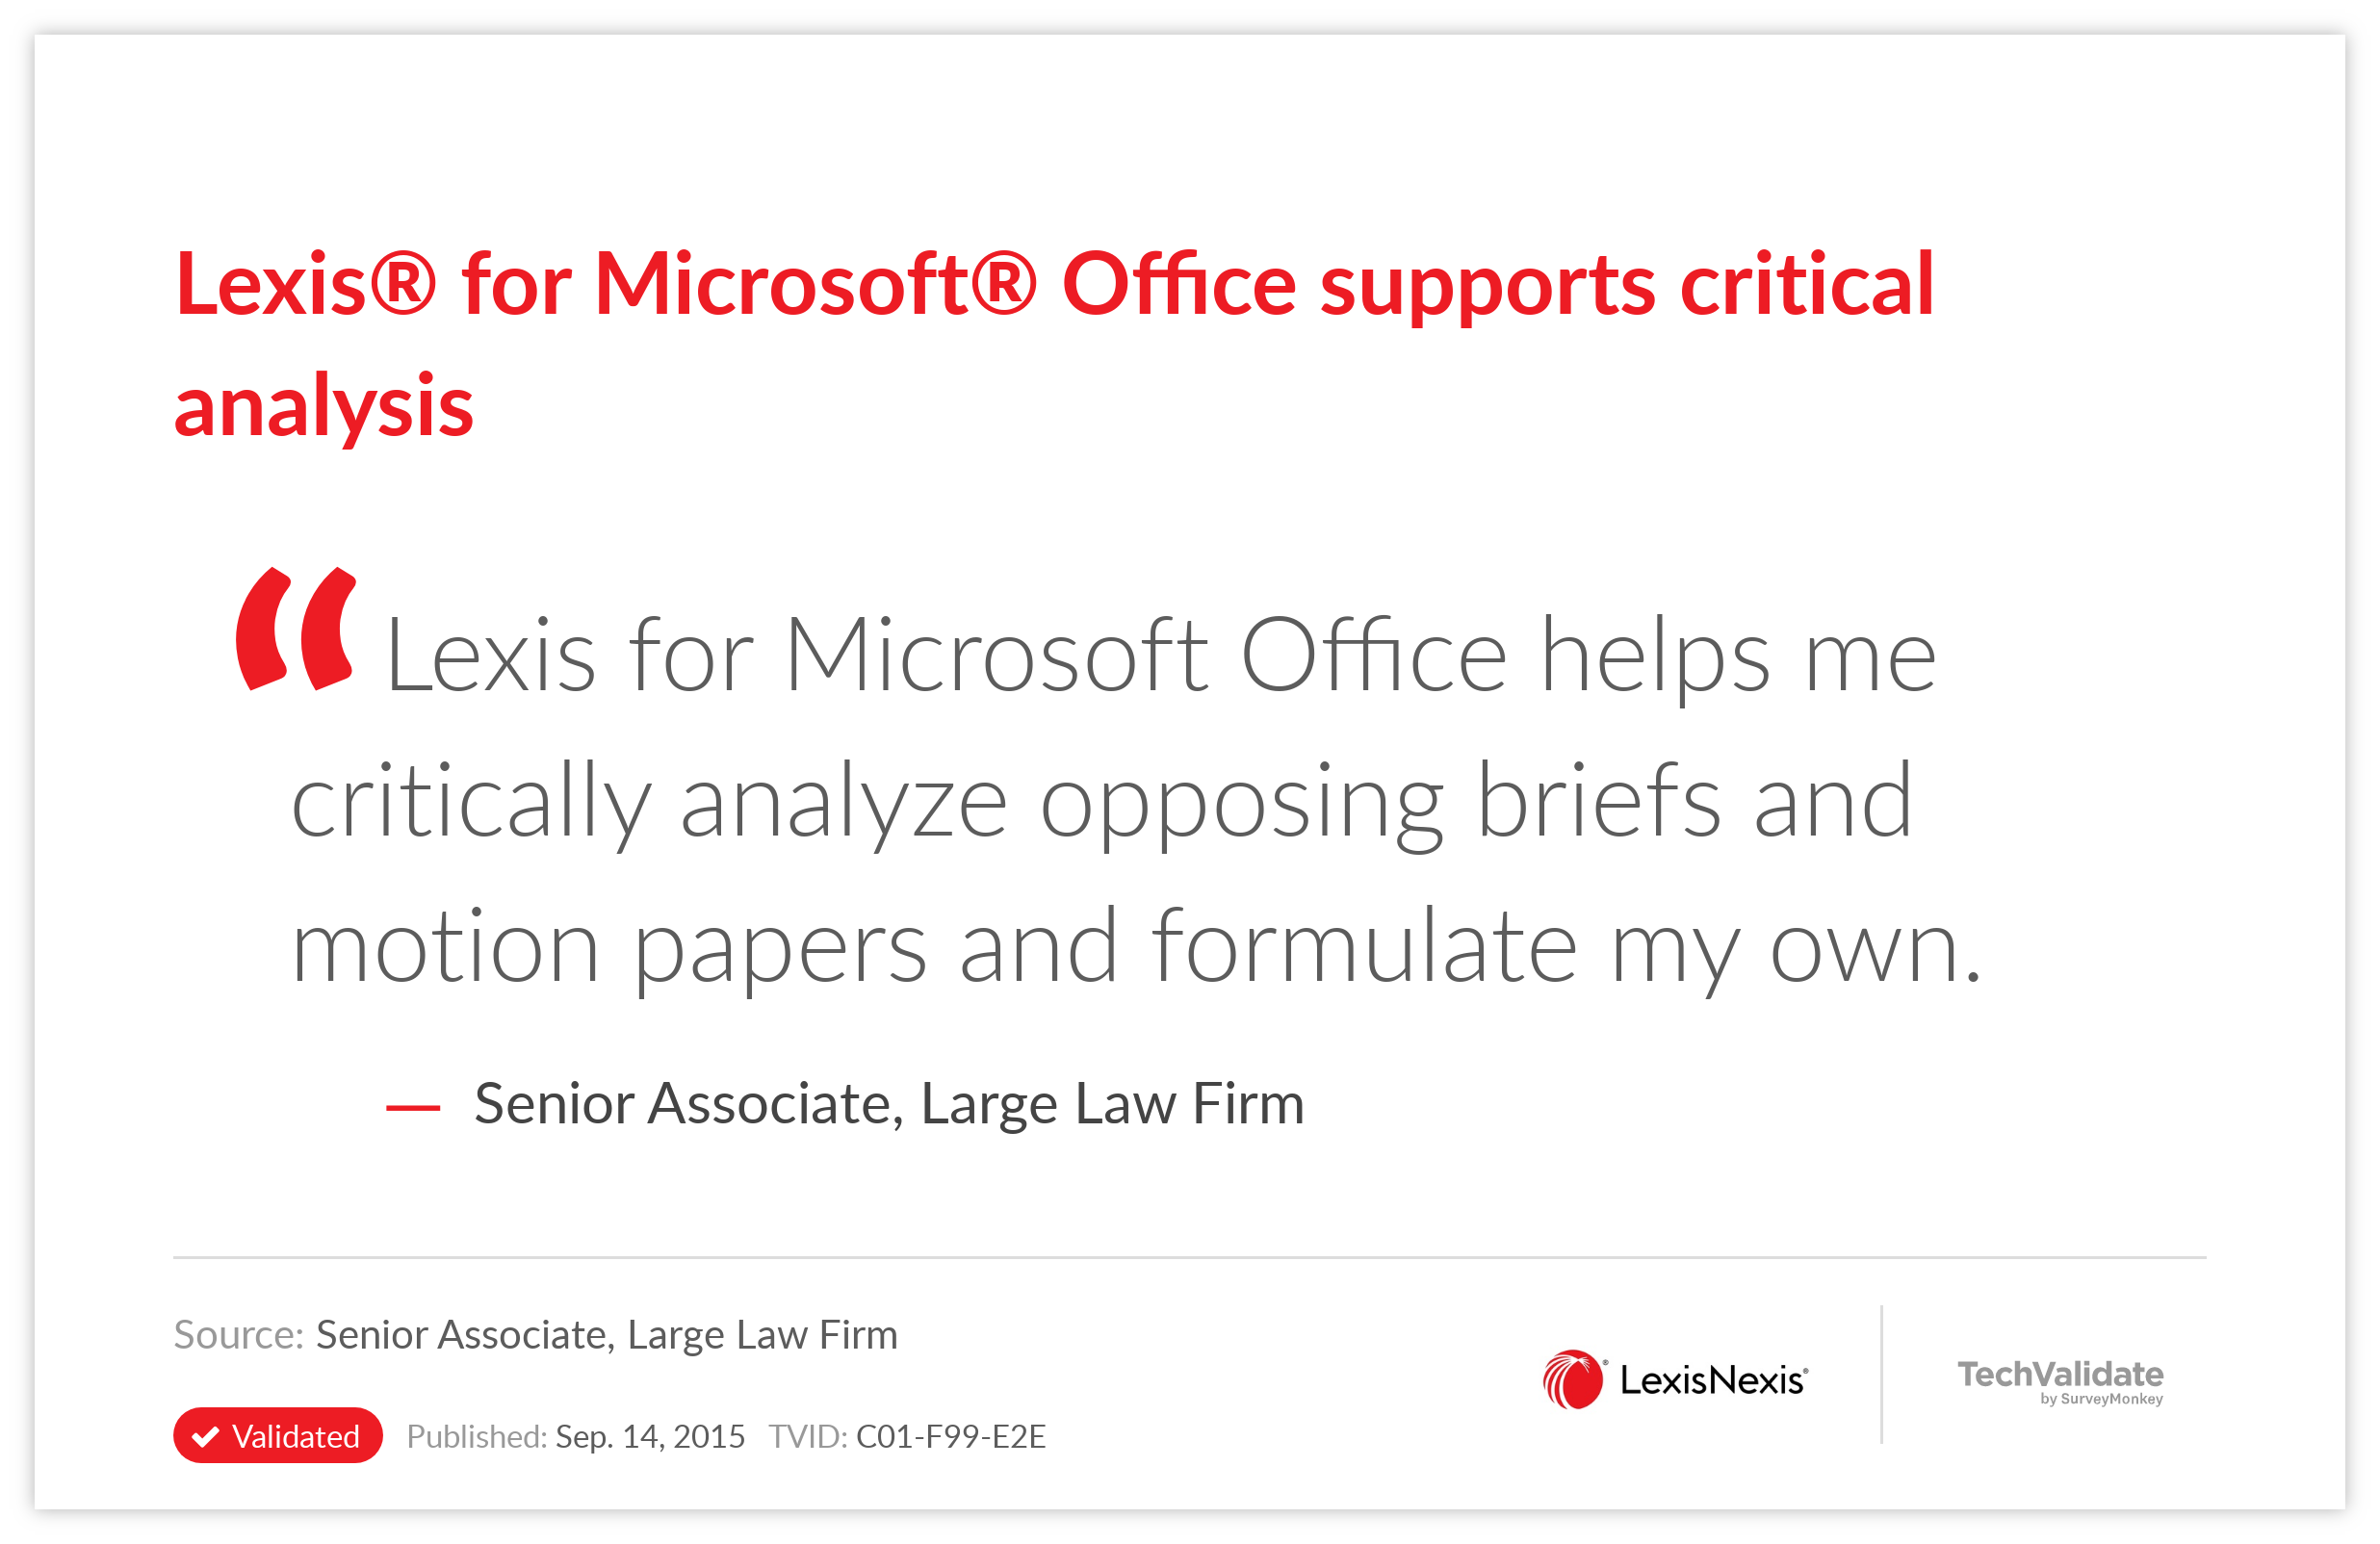 Lexis® for Microsoft® Office supports critical analysis